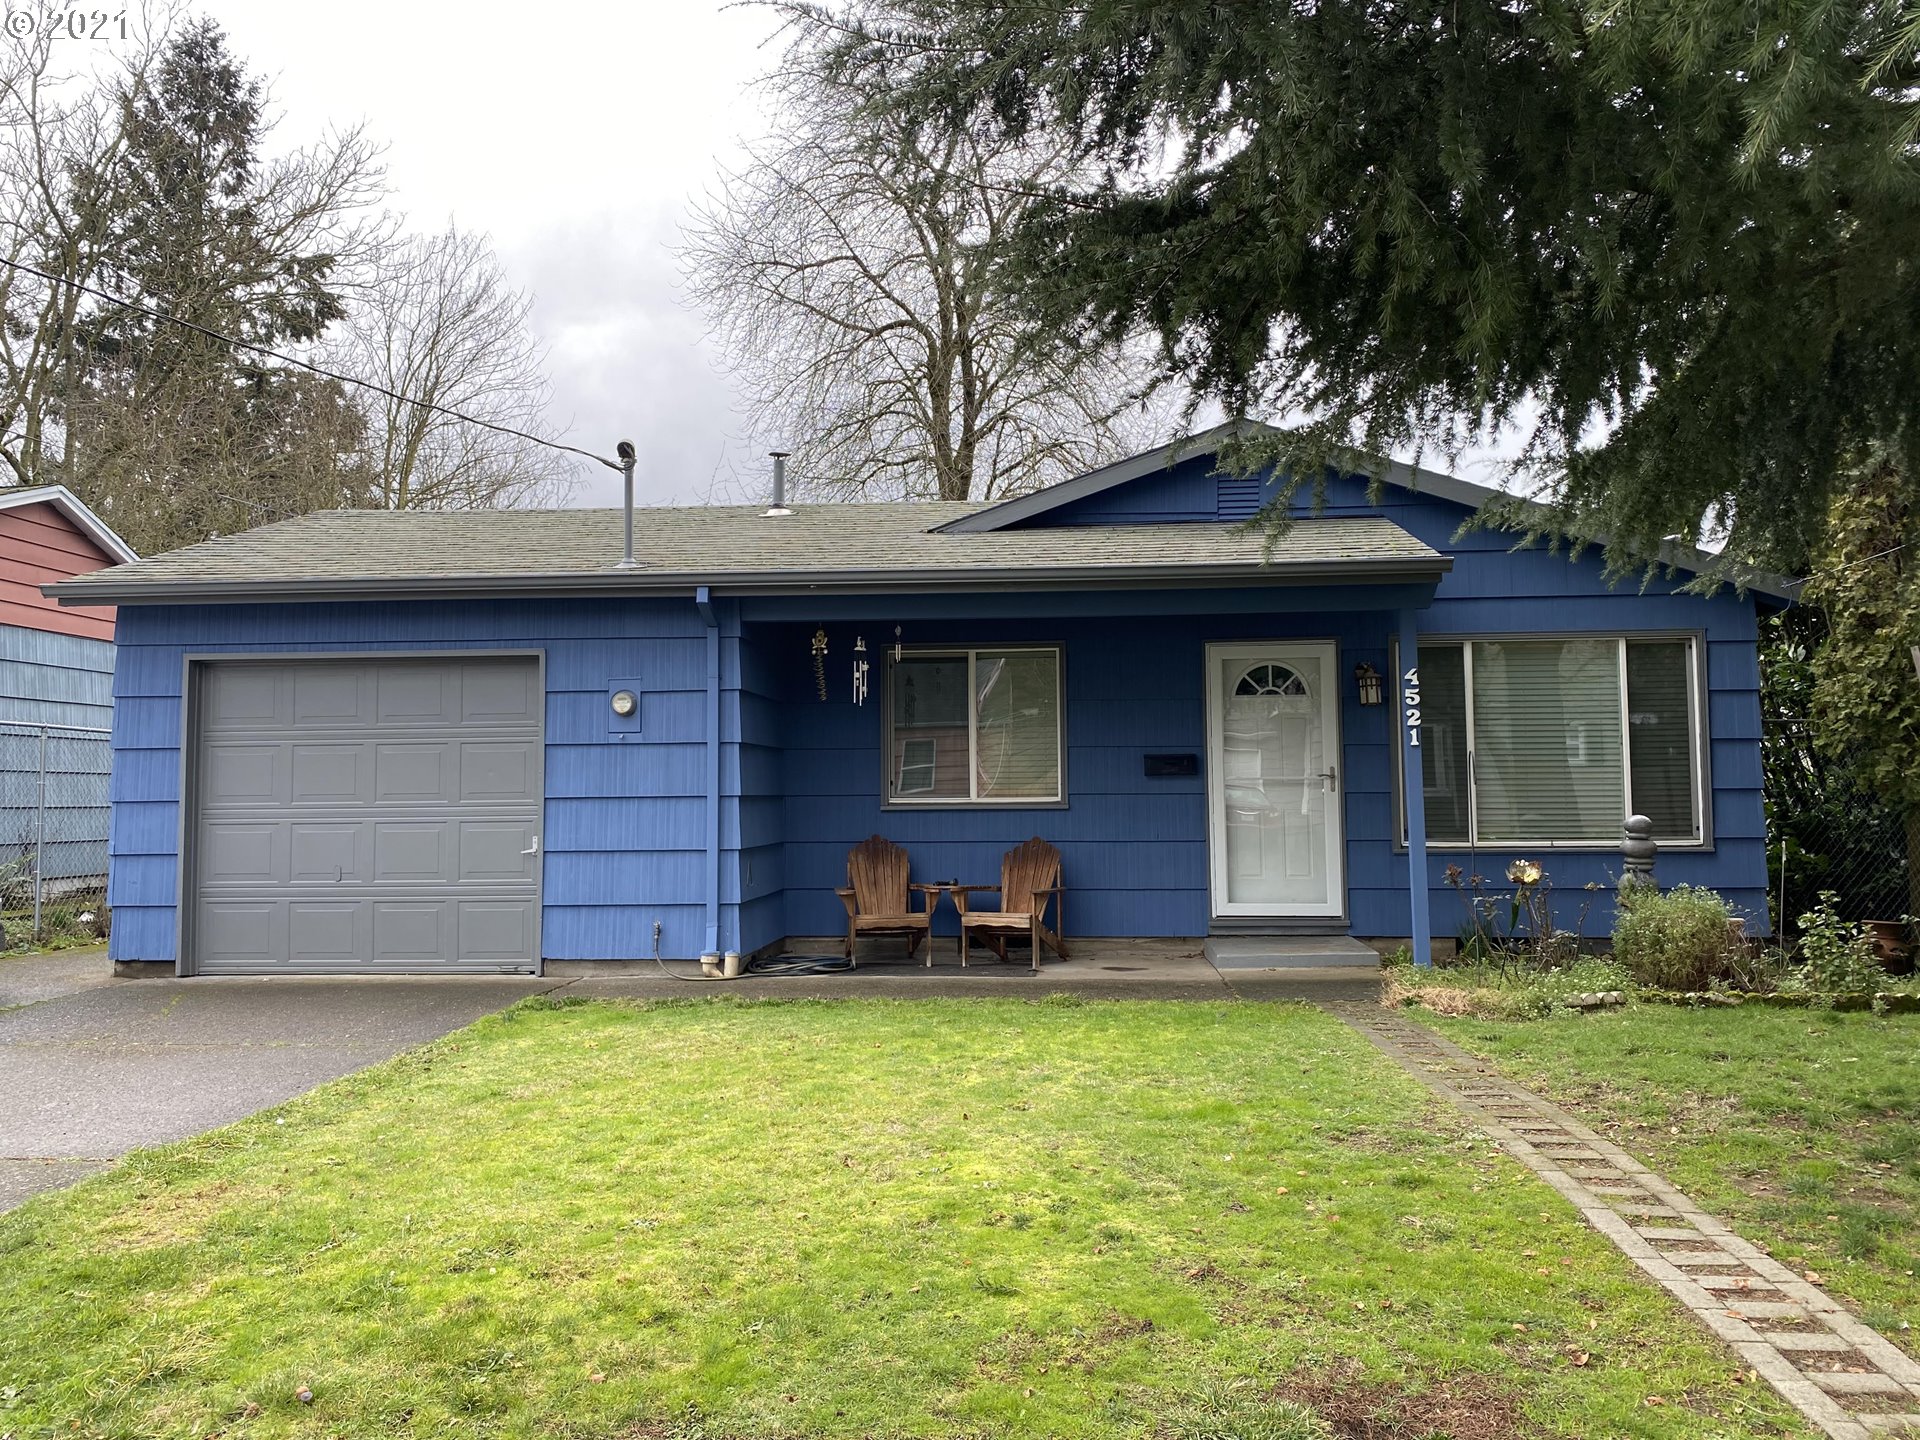 4521 SE 85TH AVE (1 of 3)